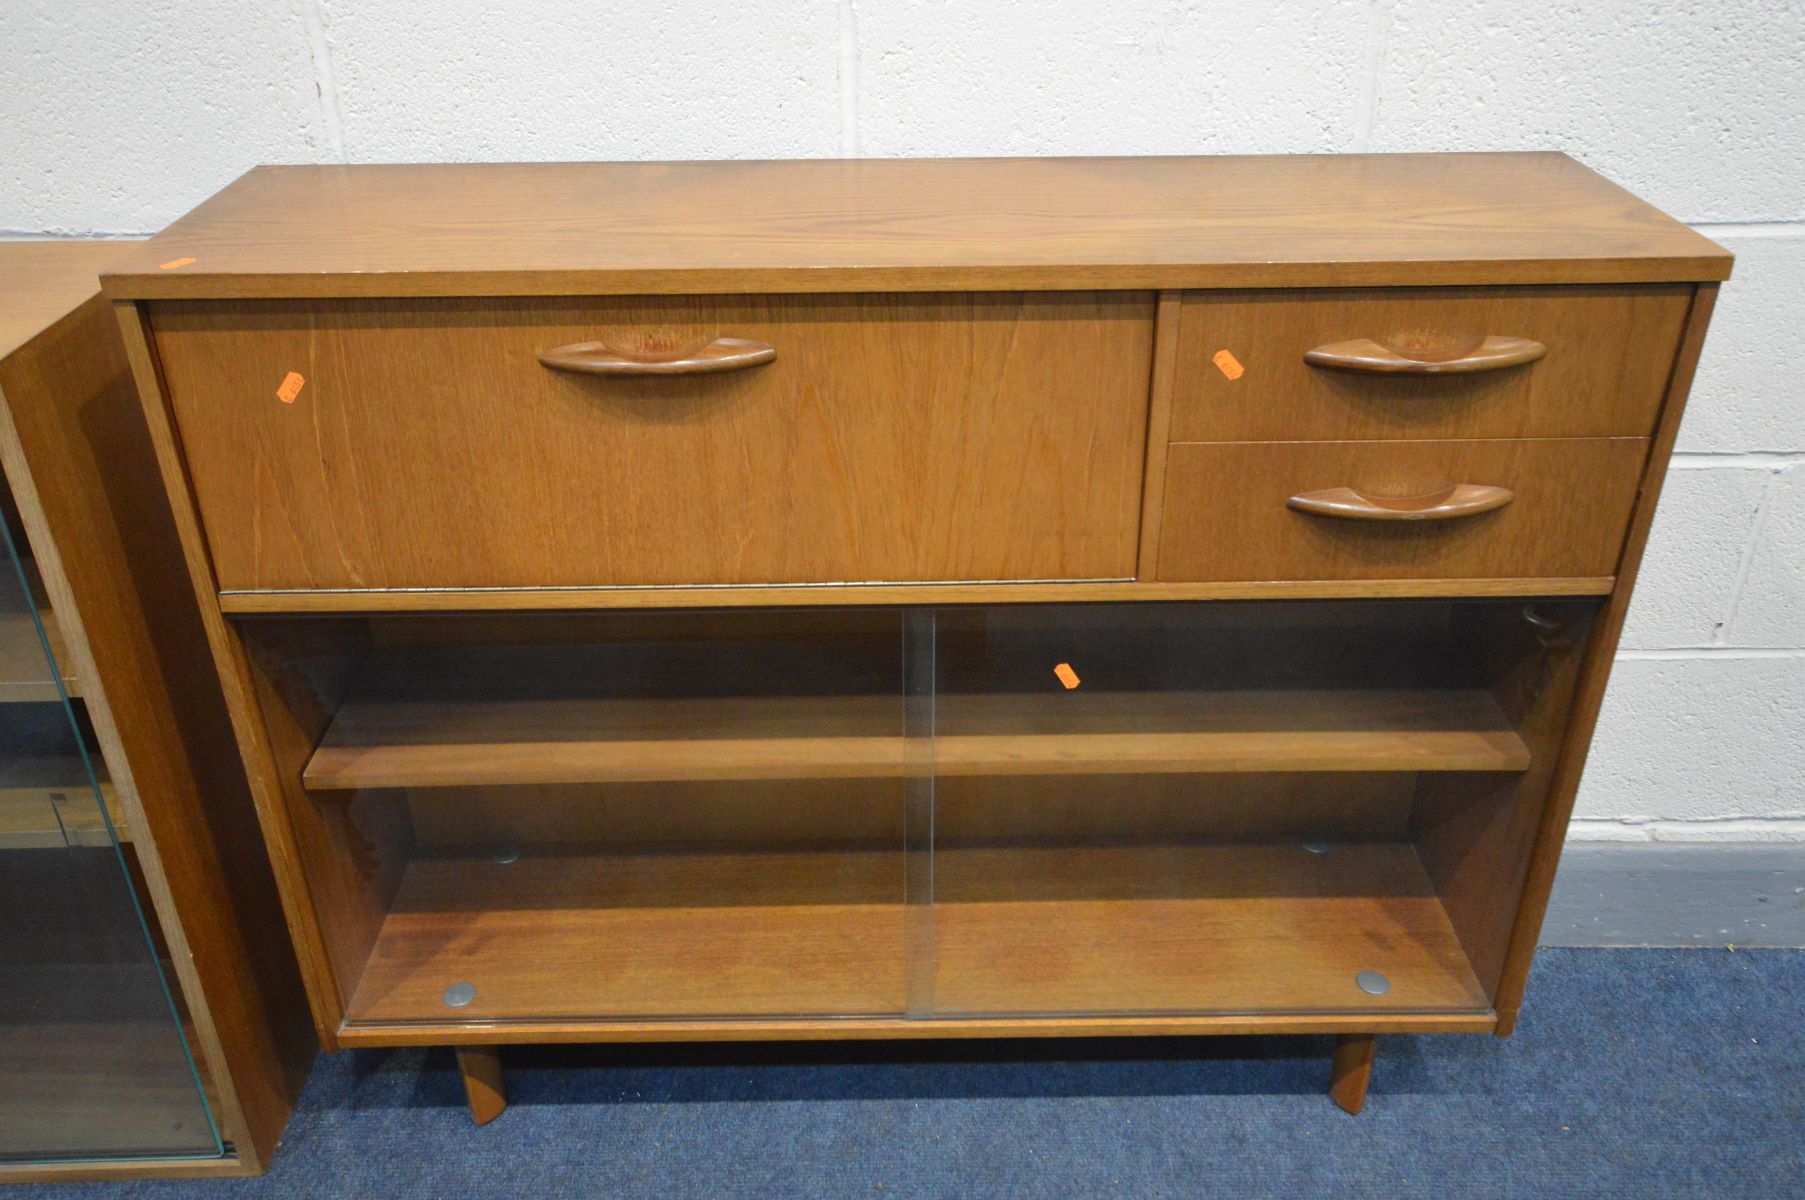 A MID 20TH CENTURY DANISH STYLE TEAK BOOKCASE, with a fall front compartment besides two drawers, - Image 2 of 4